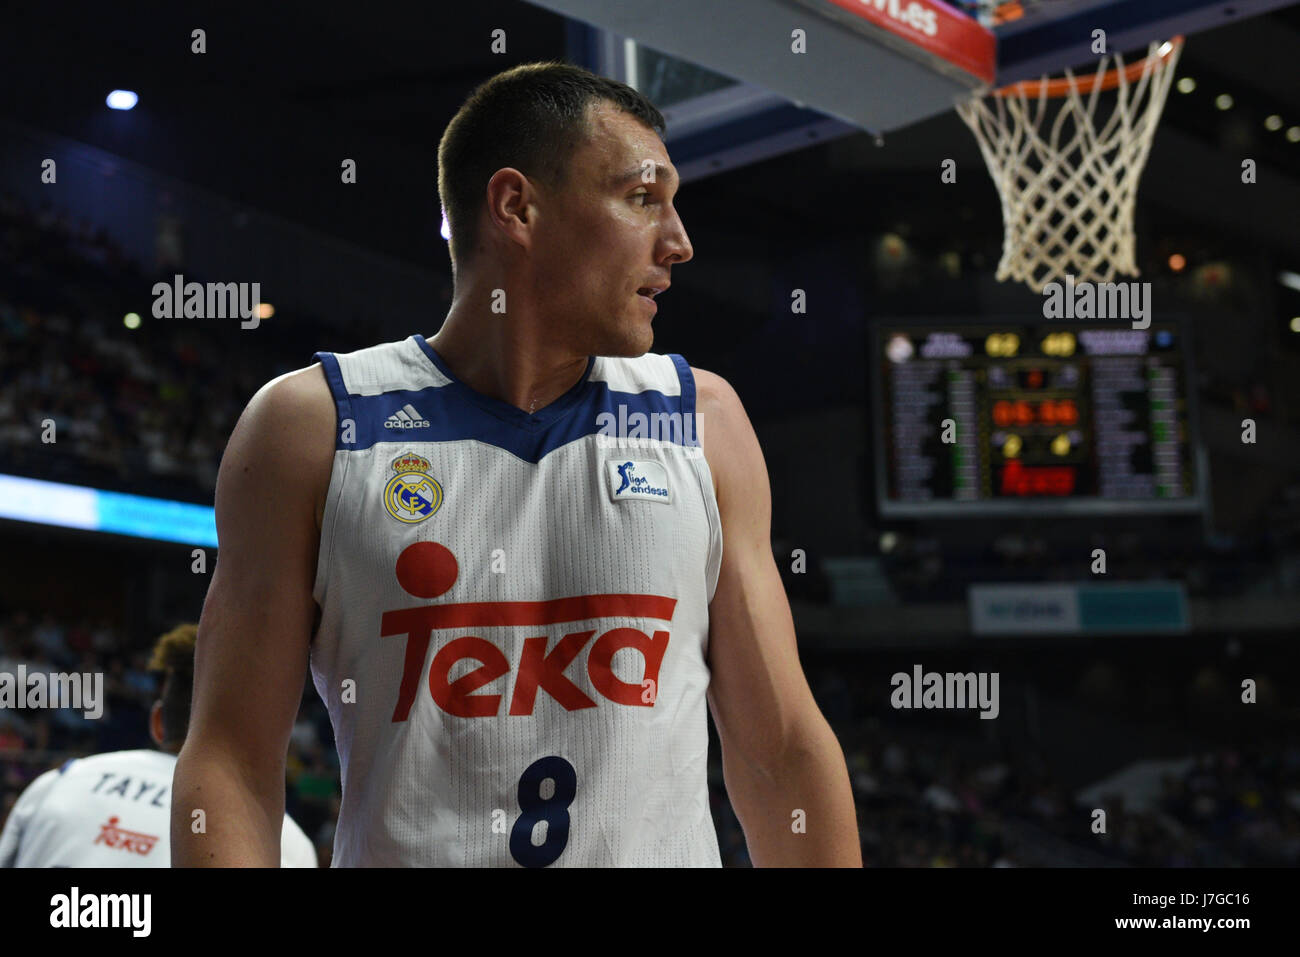 Madrid, Spain. 24th May, 2017. Jonas Maciulis, #8 of Real Madrid pictured during the first game of the quarter final of basketball Endesa league between Real Madrid and Morabanc Andorra Credit: Jorge Sanz/Pacific Press/Alamy Live News Stock Photo